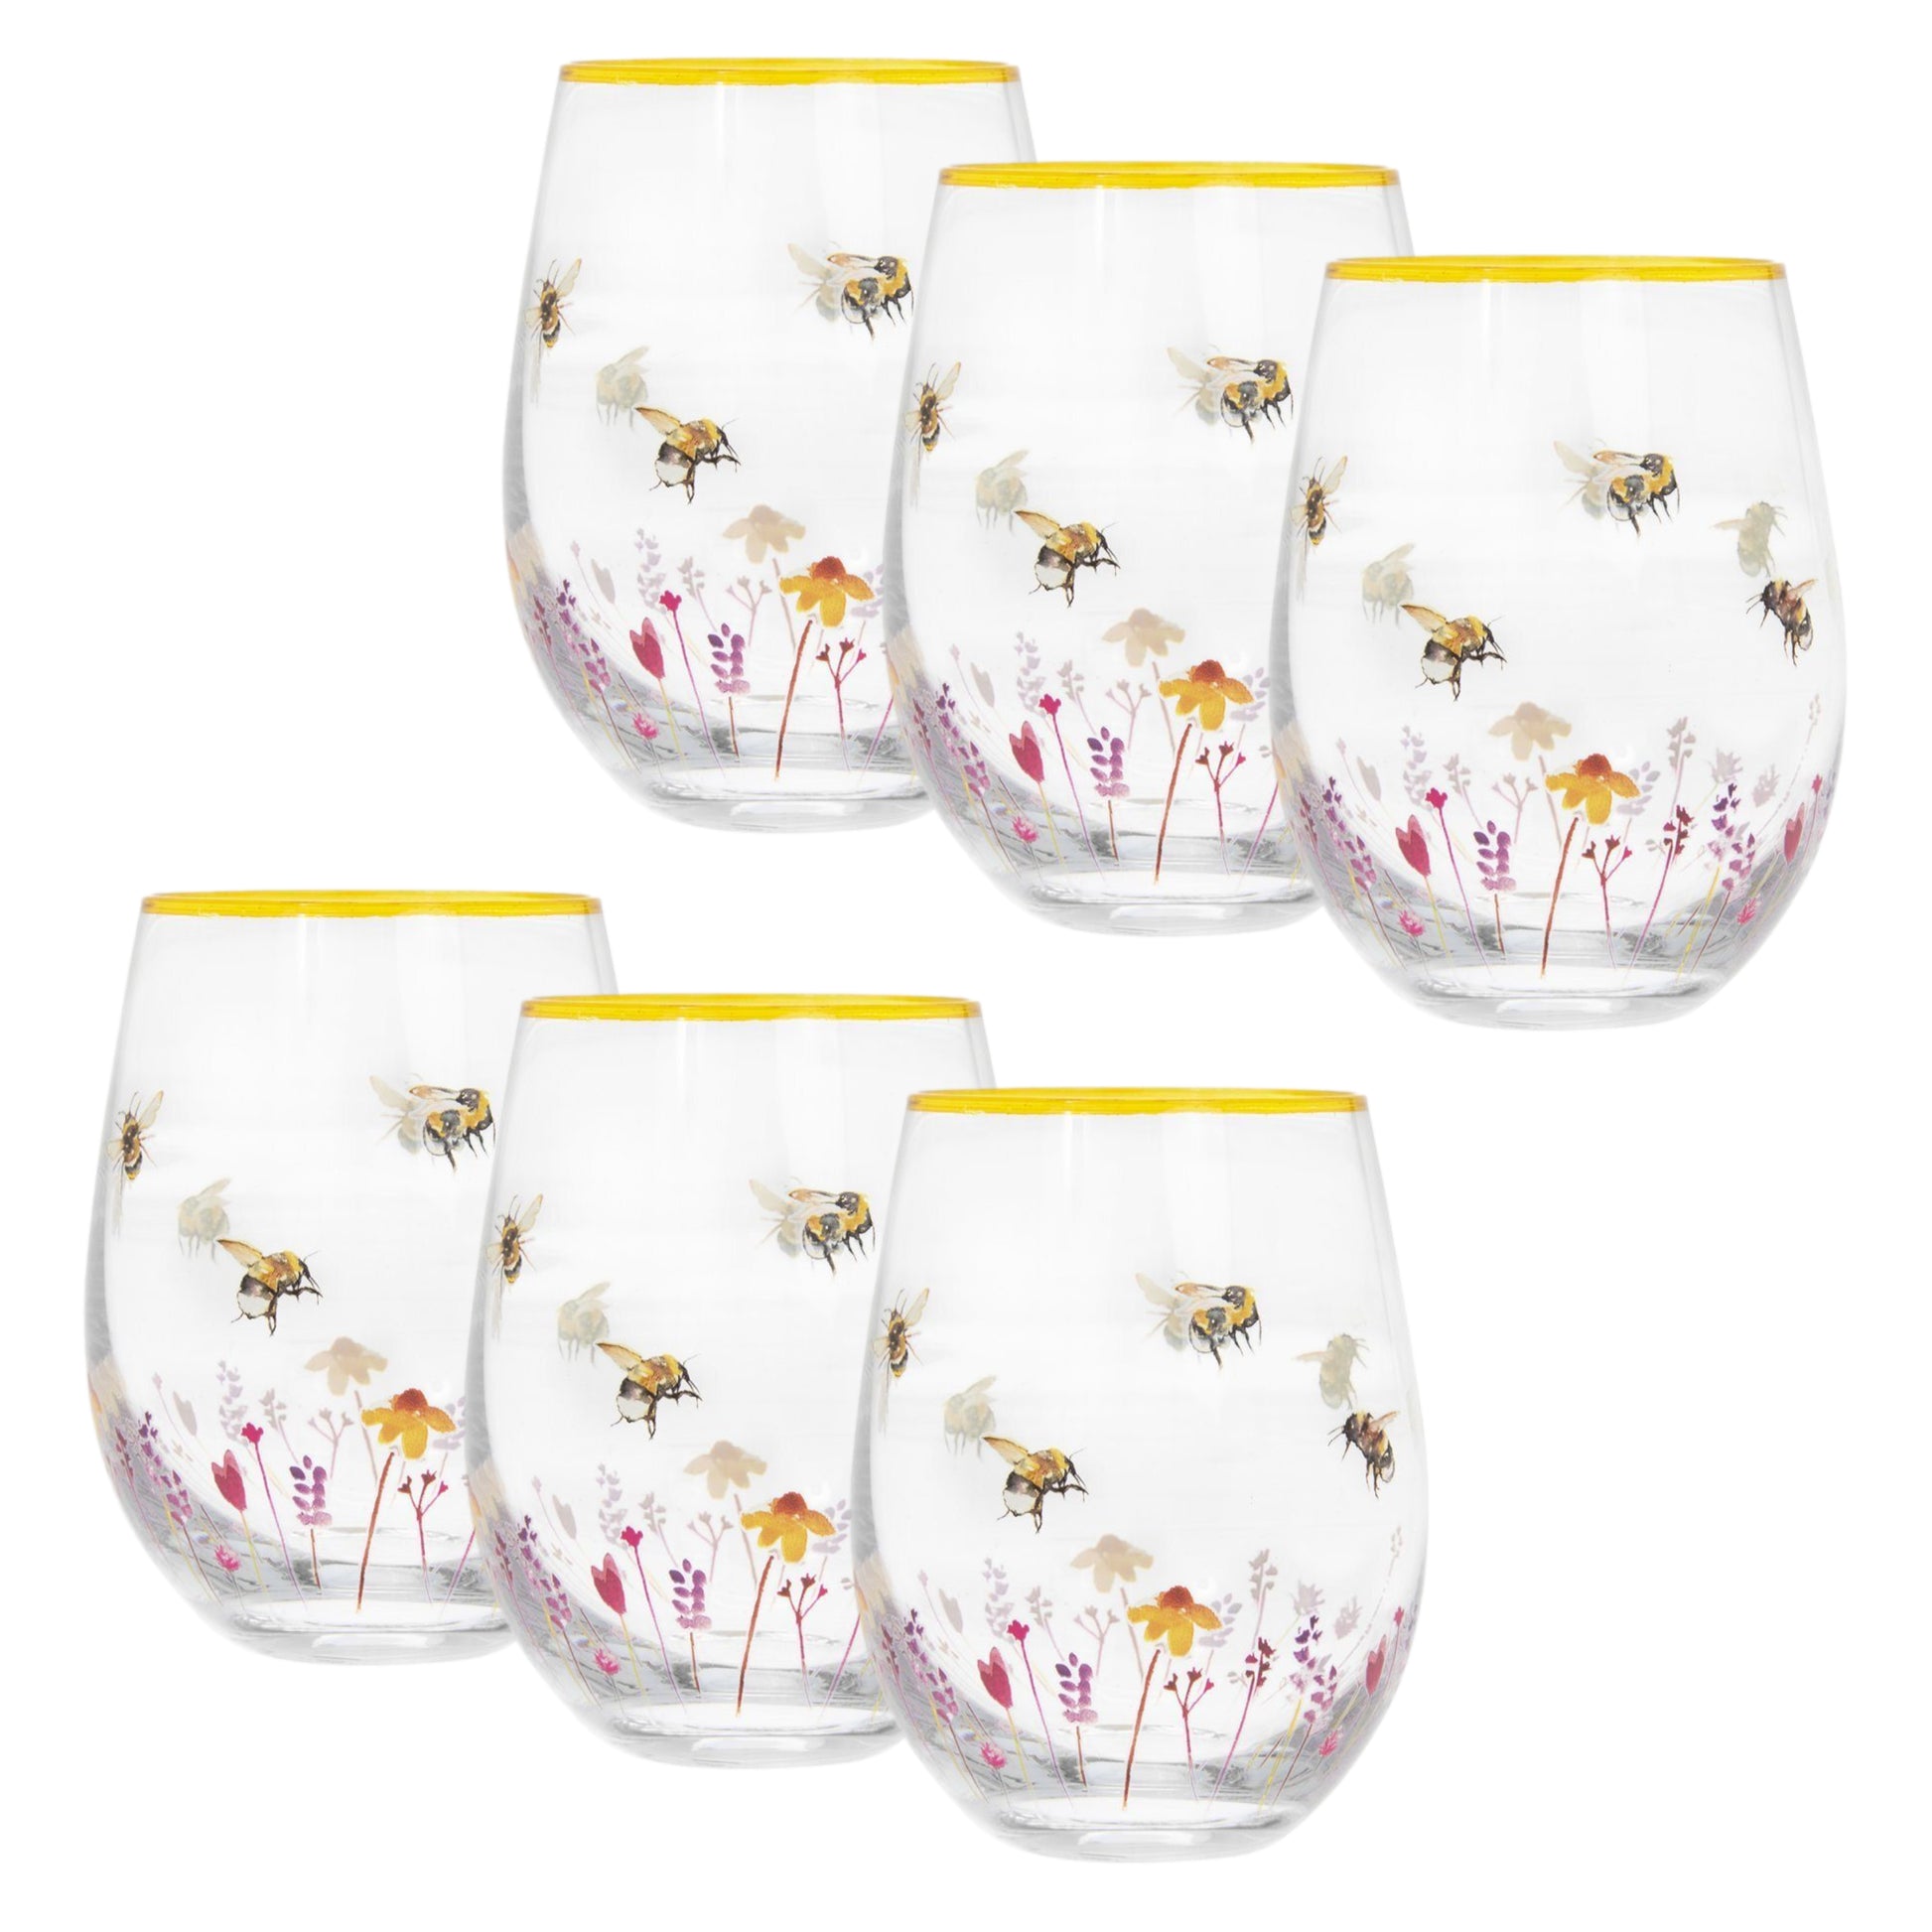 6PCS Bees & Flowers Stemless Glass Liquor Gin Cocktail Flowers